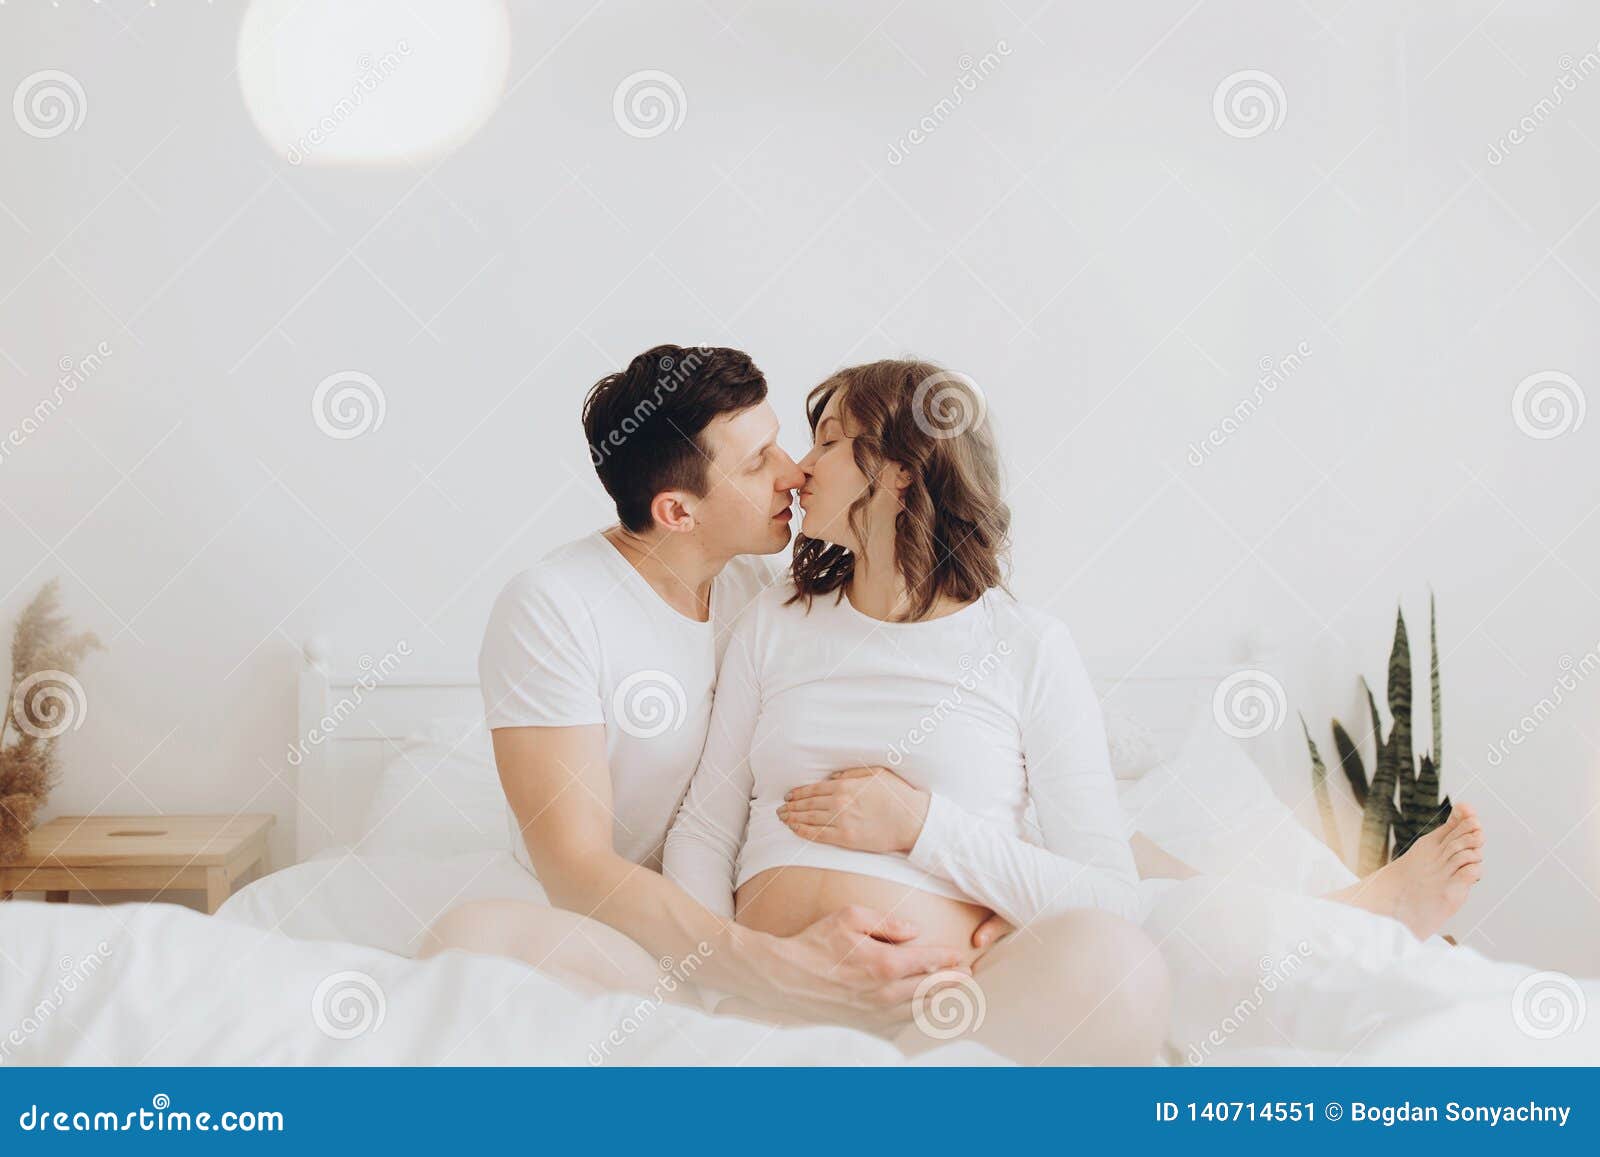 705 Husband Kissing Pregnant Belly His Wife Stock Photos